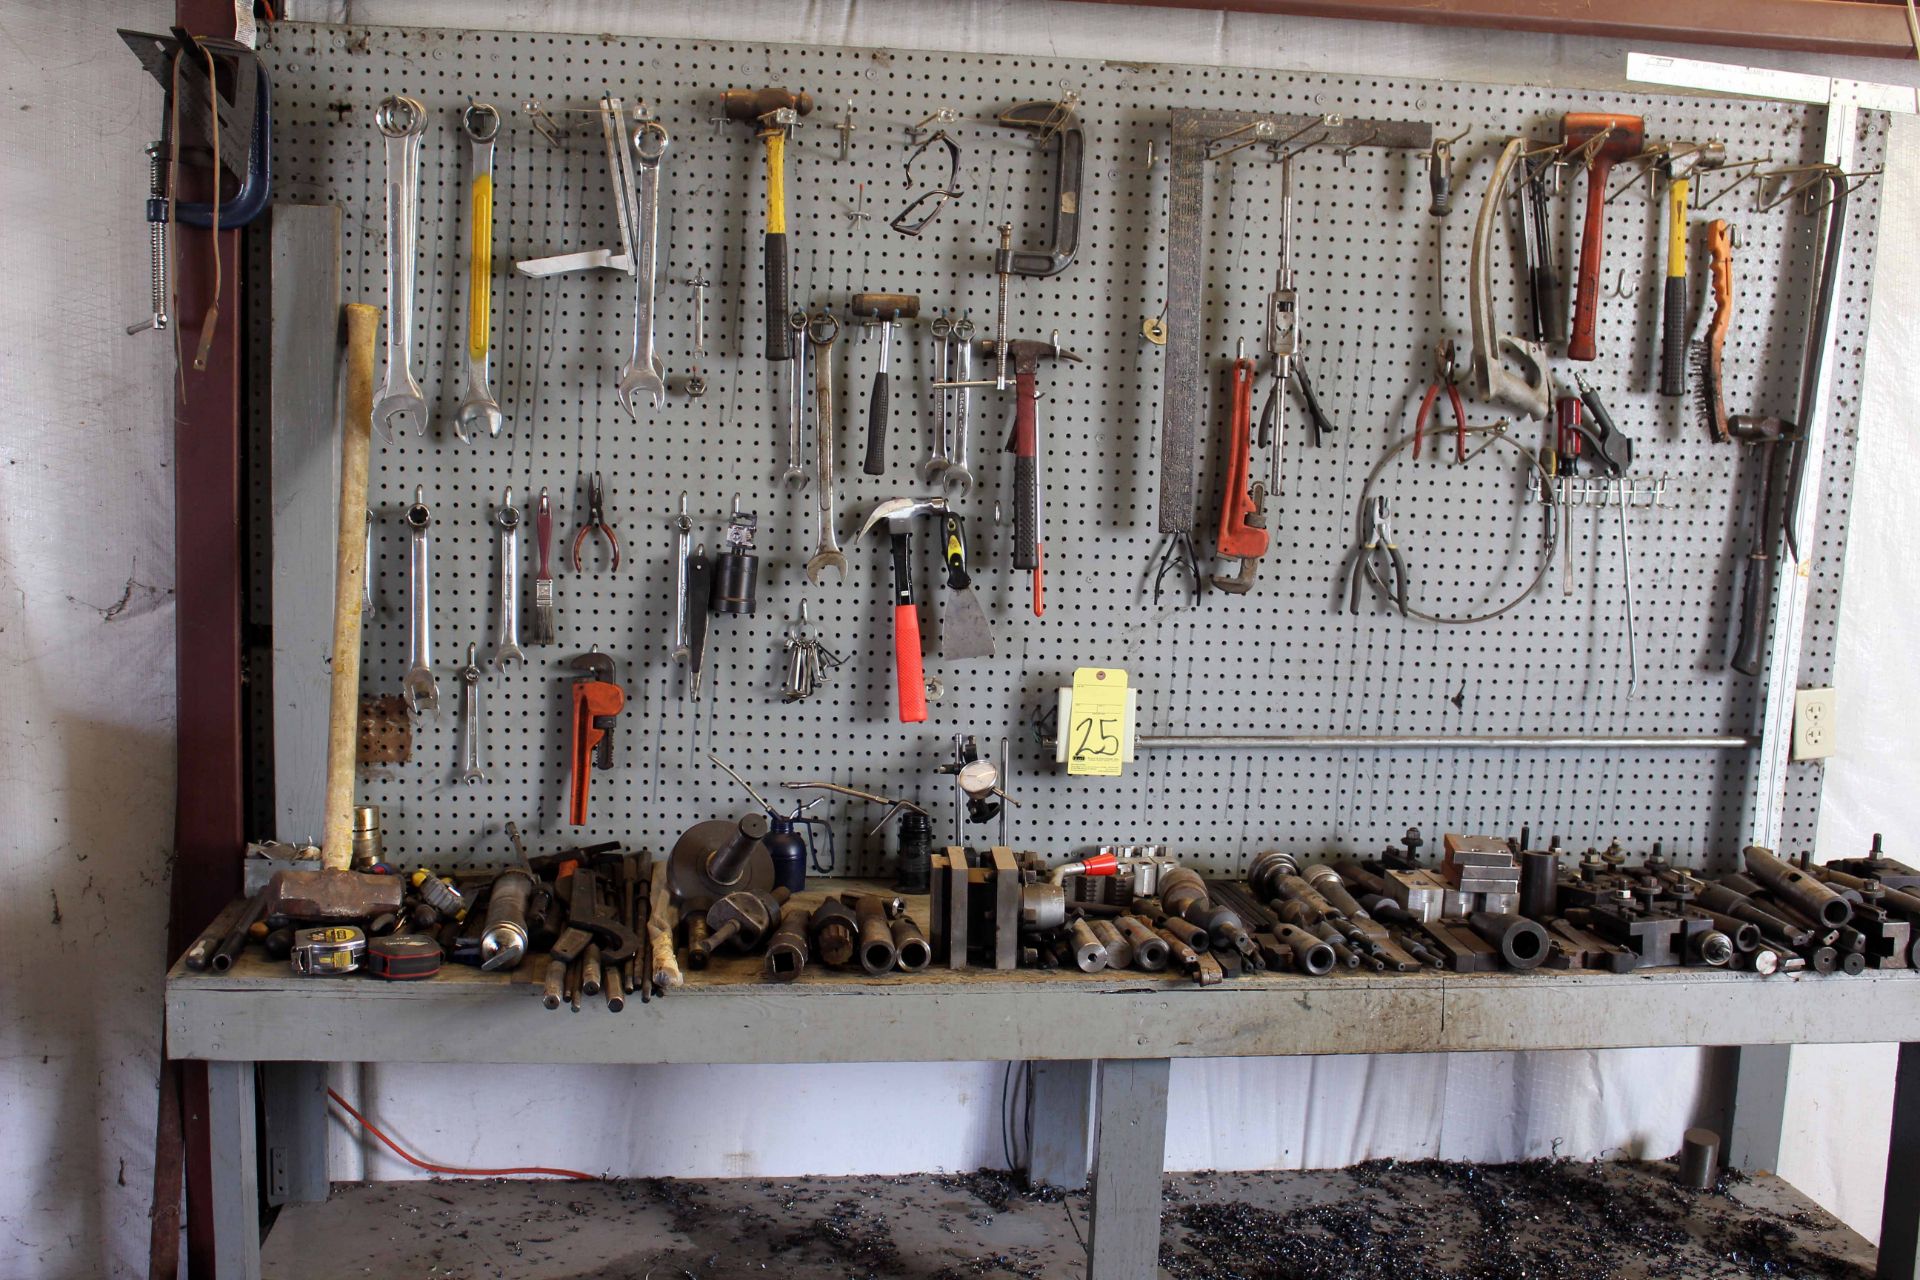 LOT OF TOOLS, misc. (on bench)